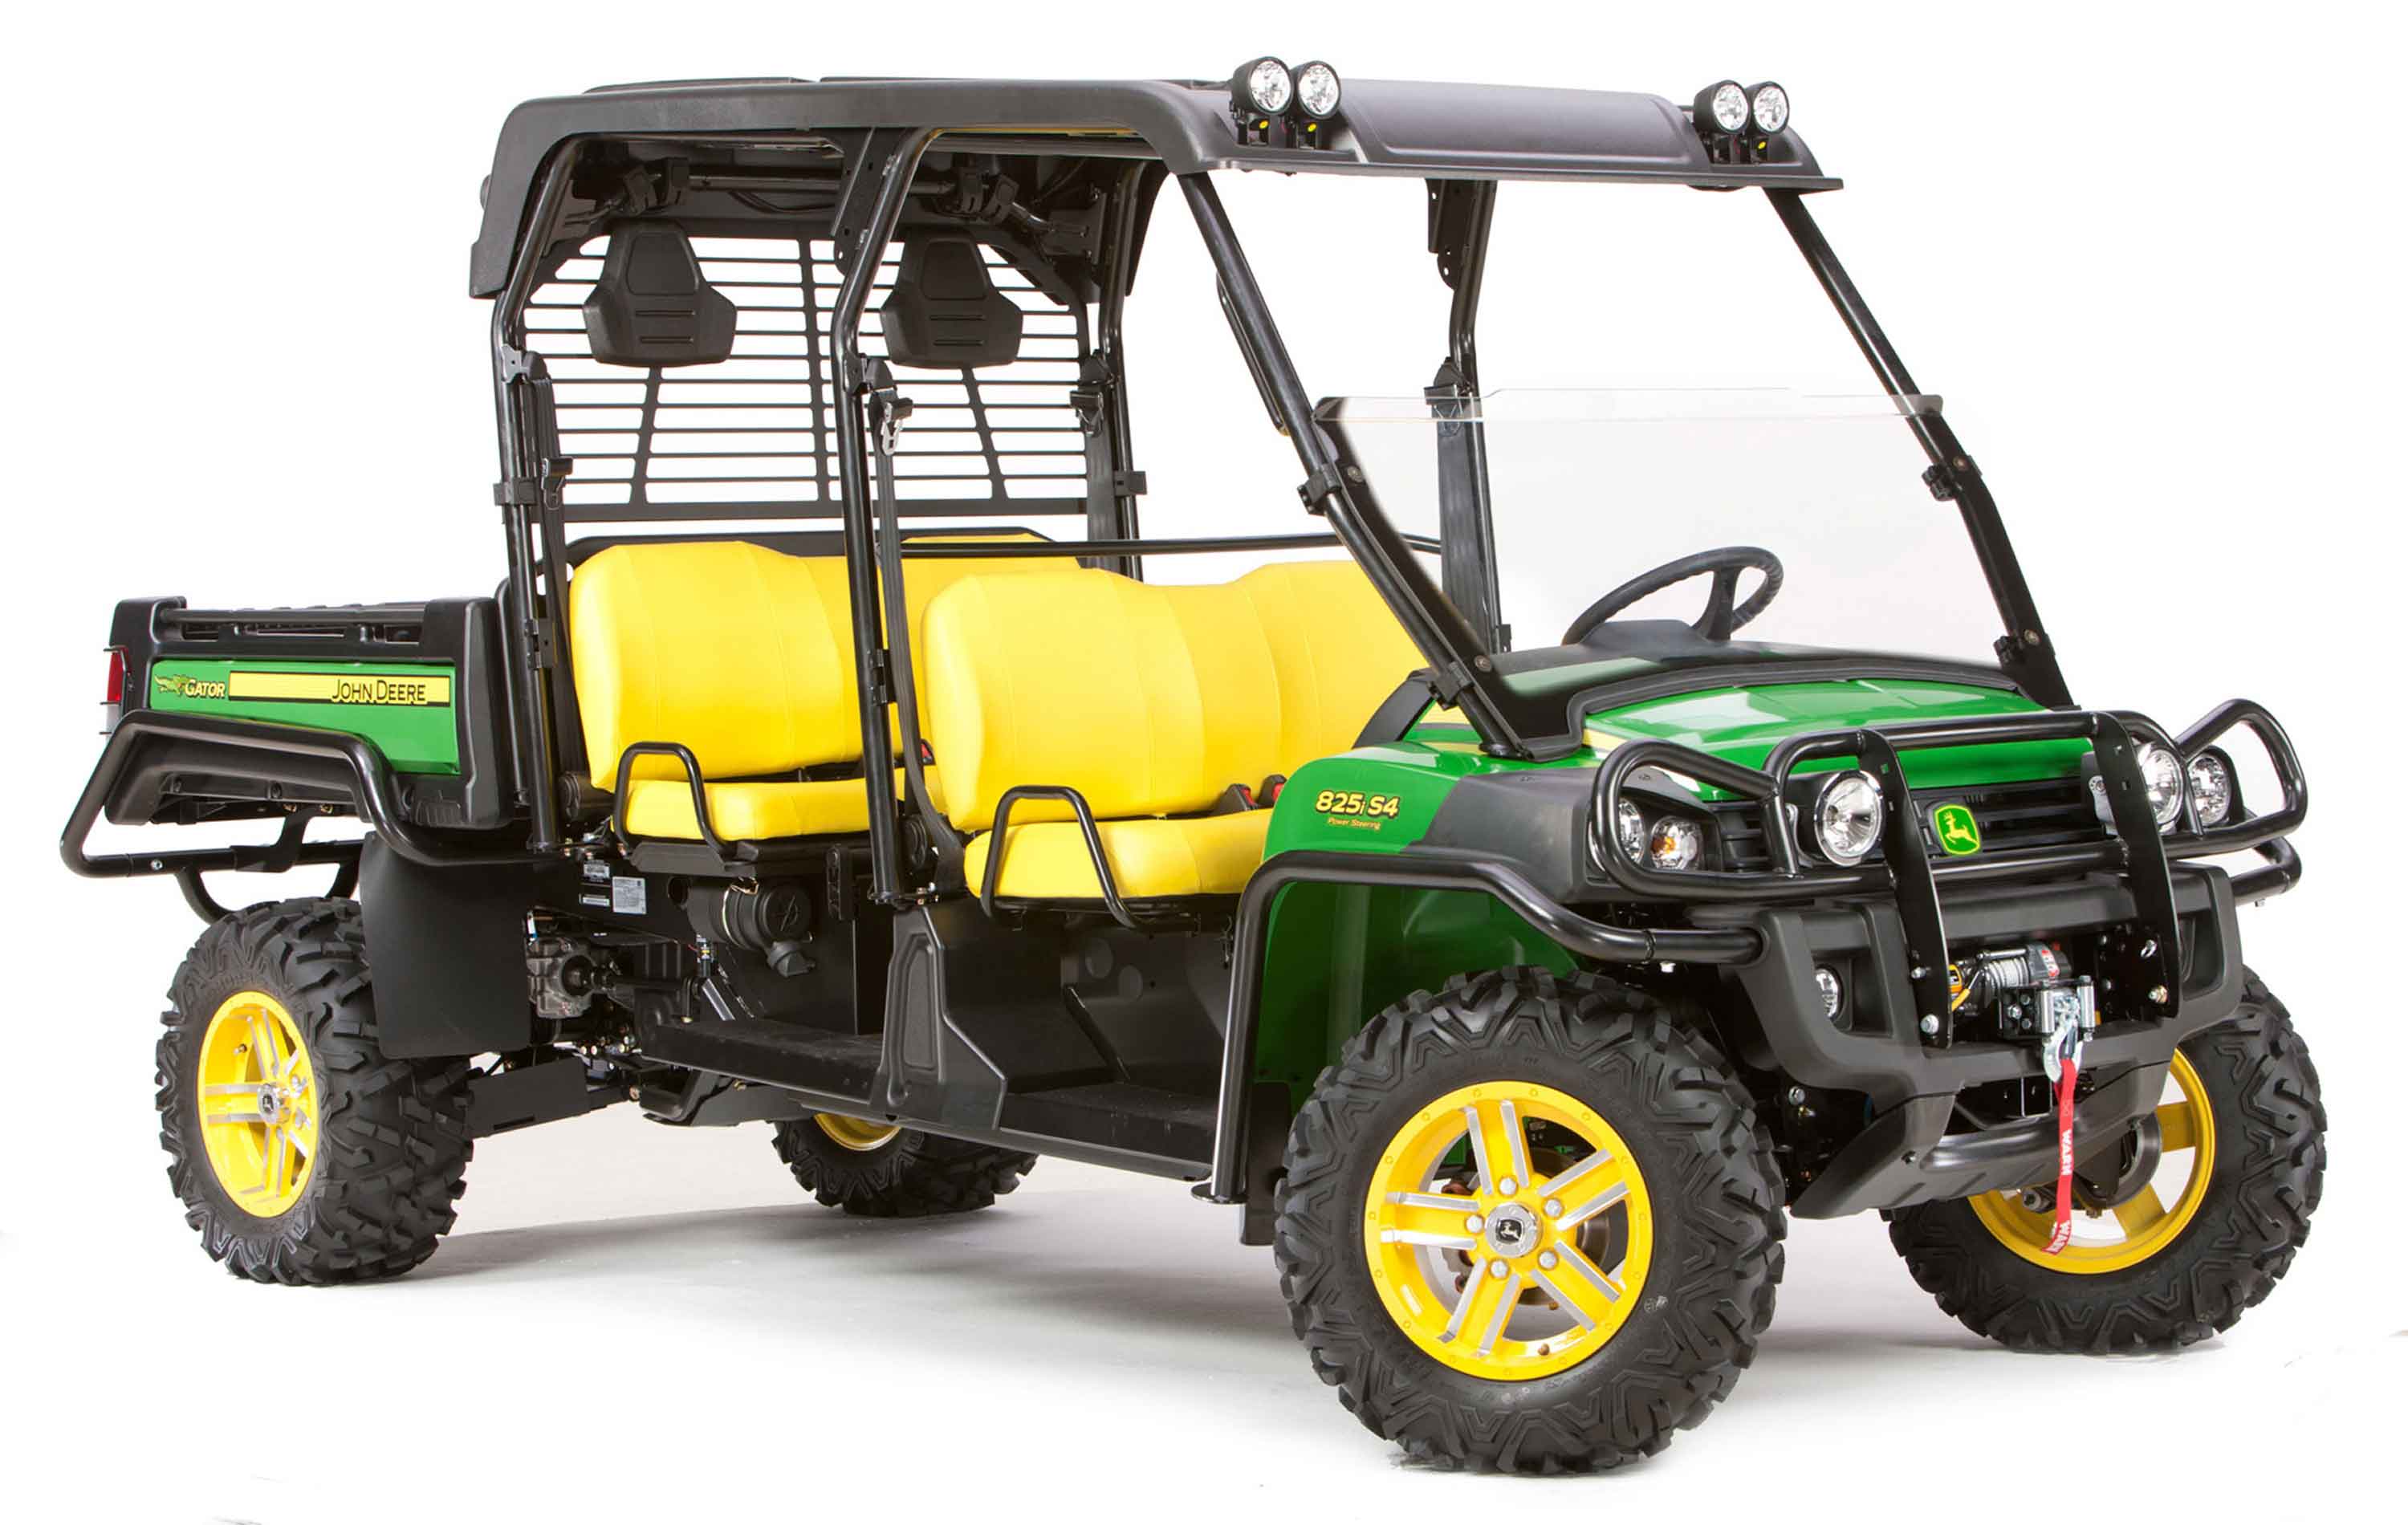 John Deere Introduces Four Seat Gator XUVs: 825i S4 and ...